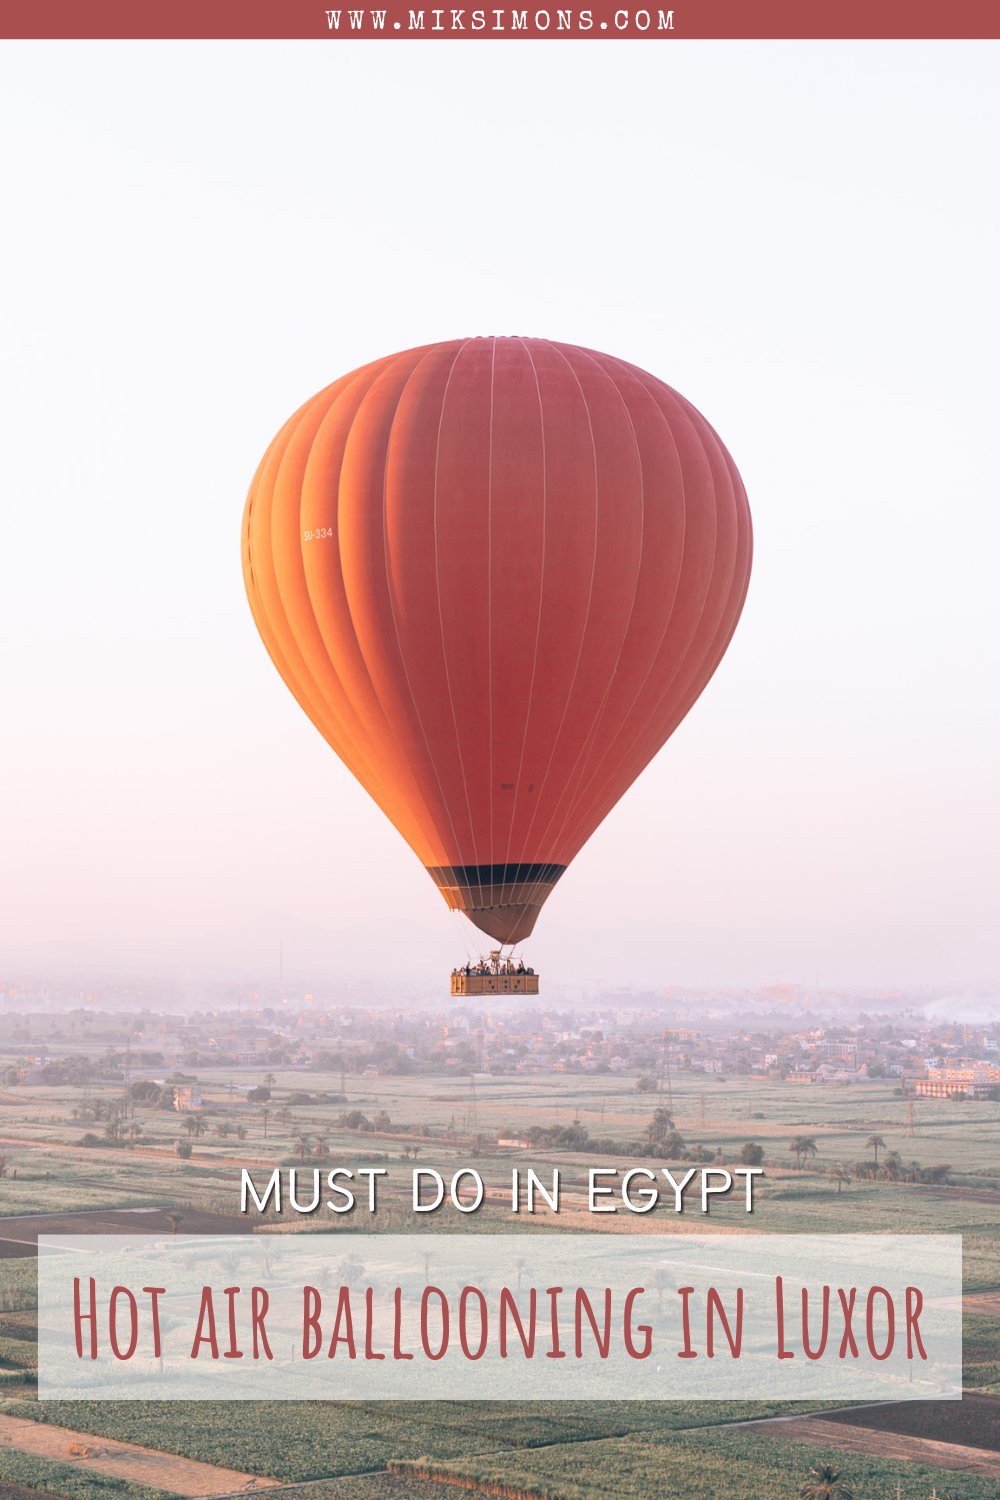 Hot air balloon ride in Luxor - Adventure in Egypt